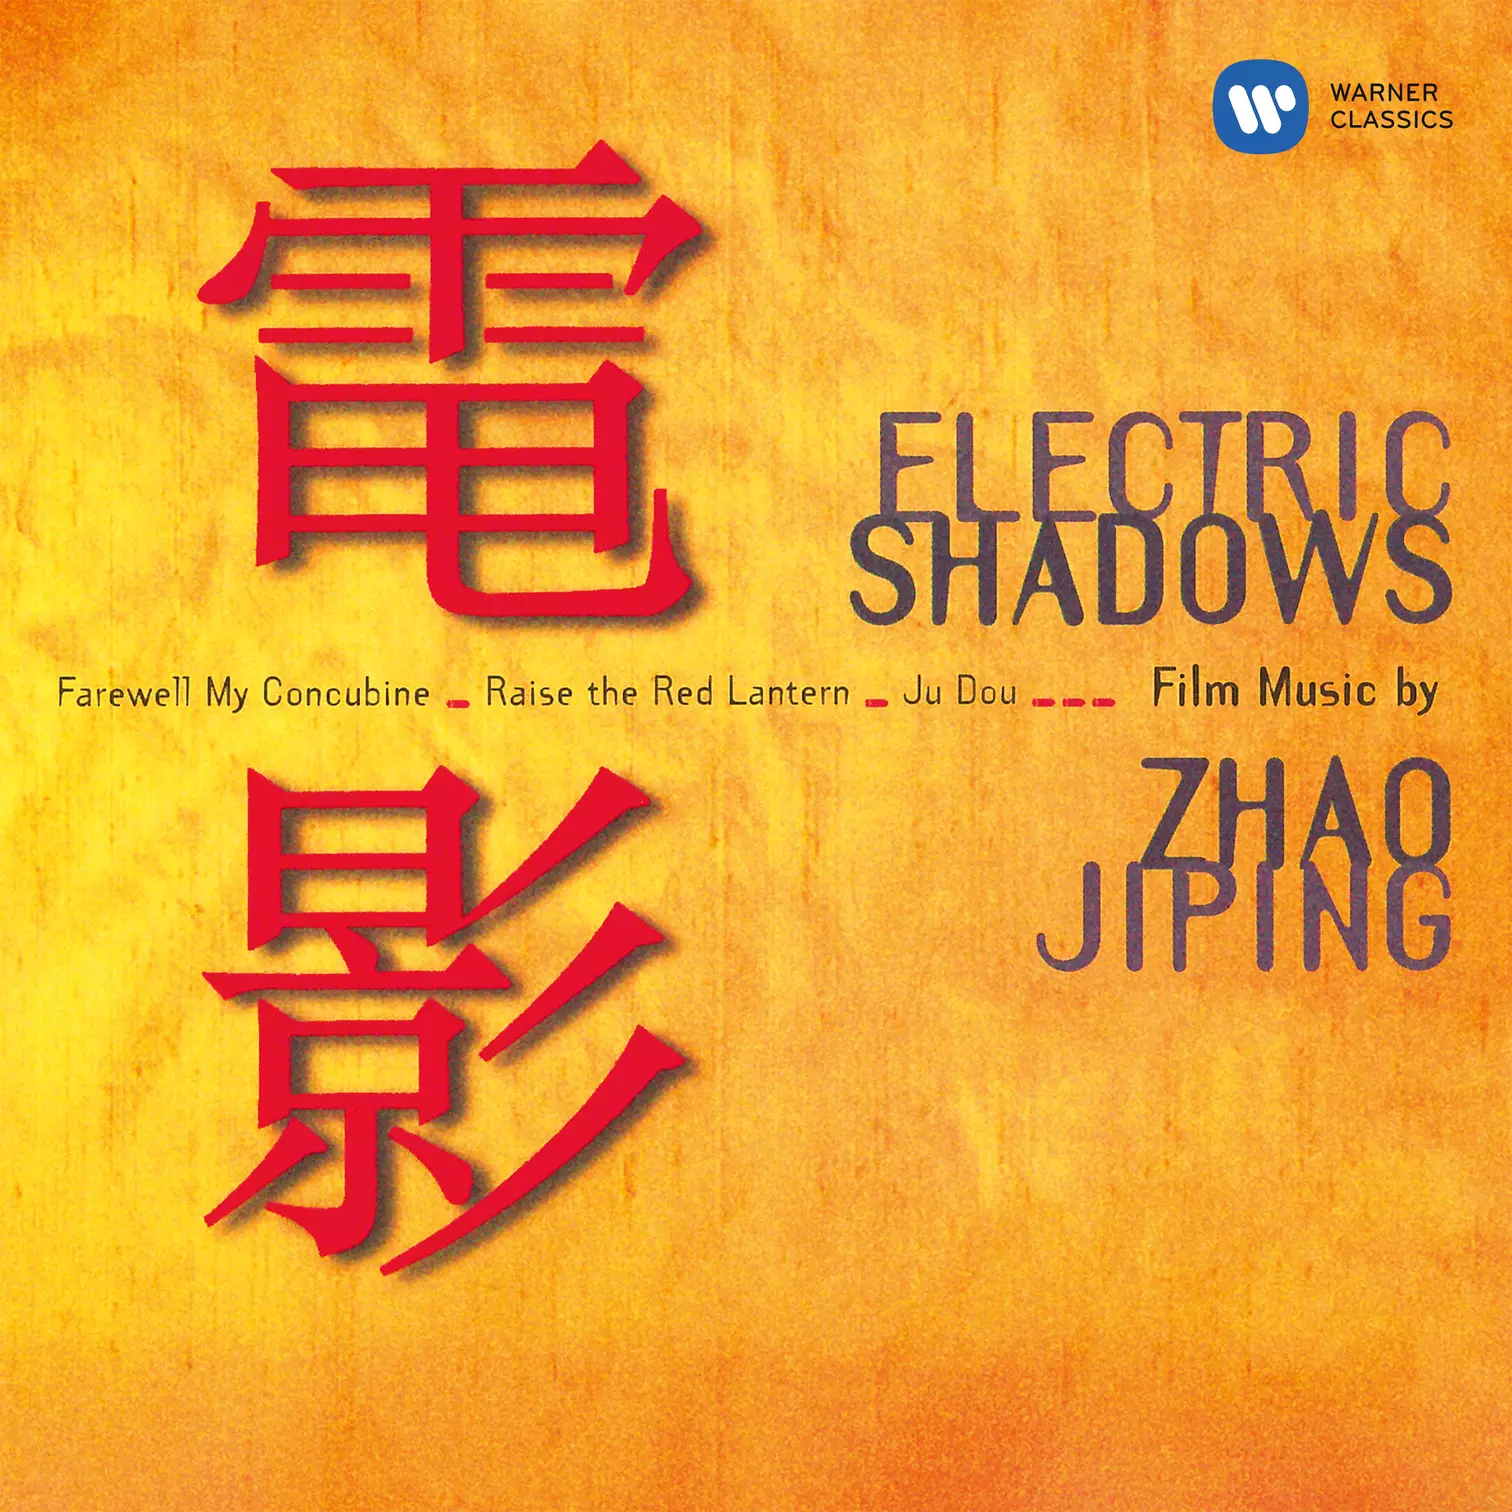 Electric Shadows: Film Music by Zhao Jiping